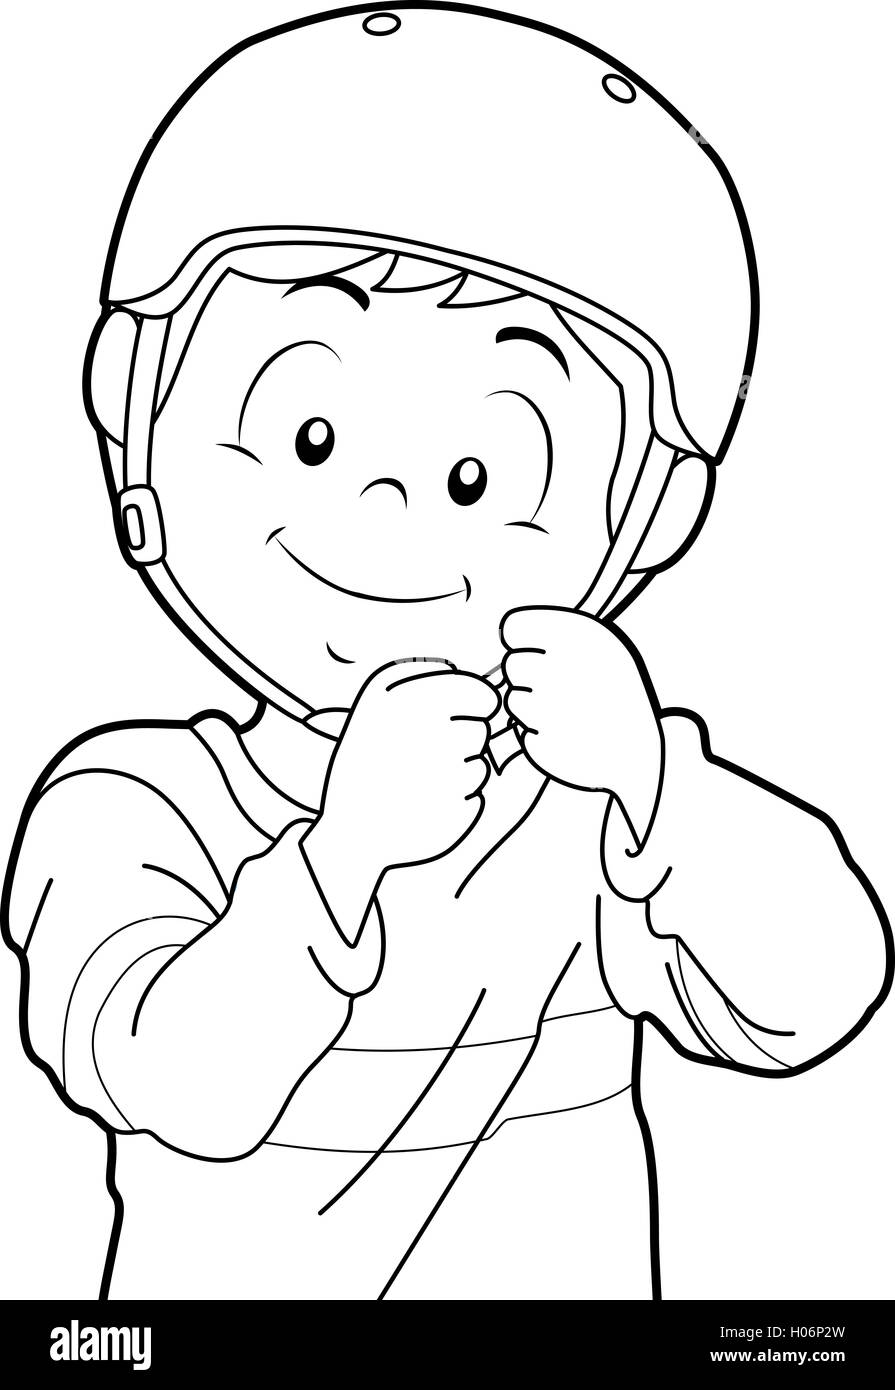 Black and White Coloring Page Illustration Featuring a Boy Putting a Helmet On Stock Photo